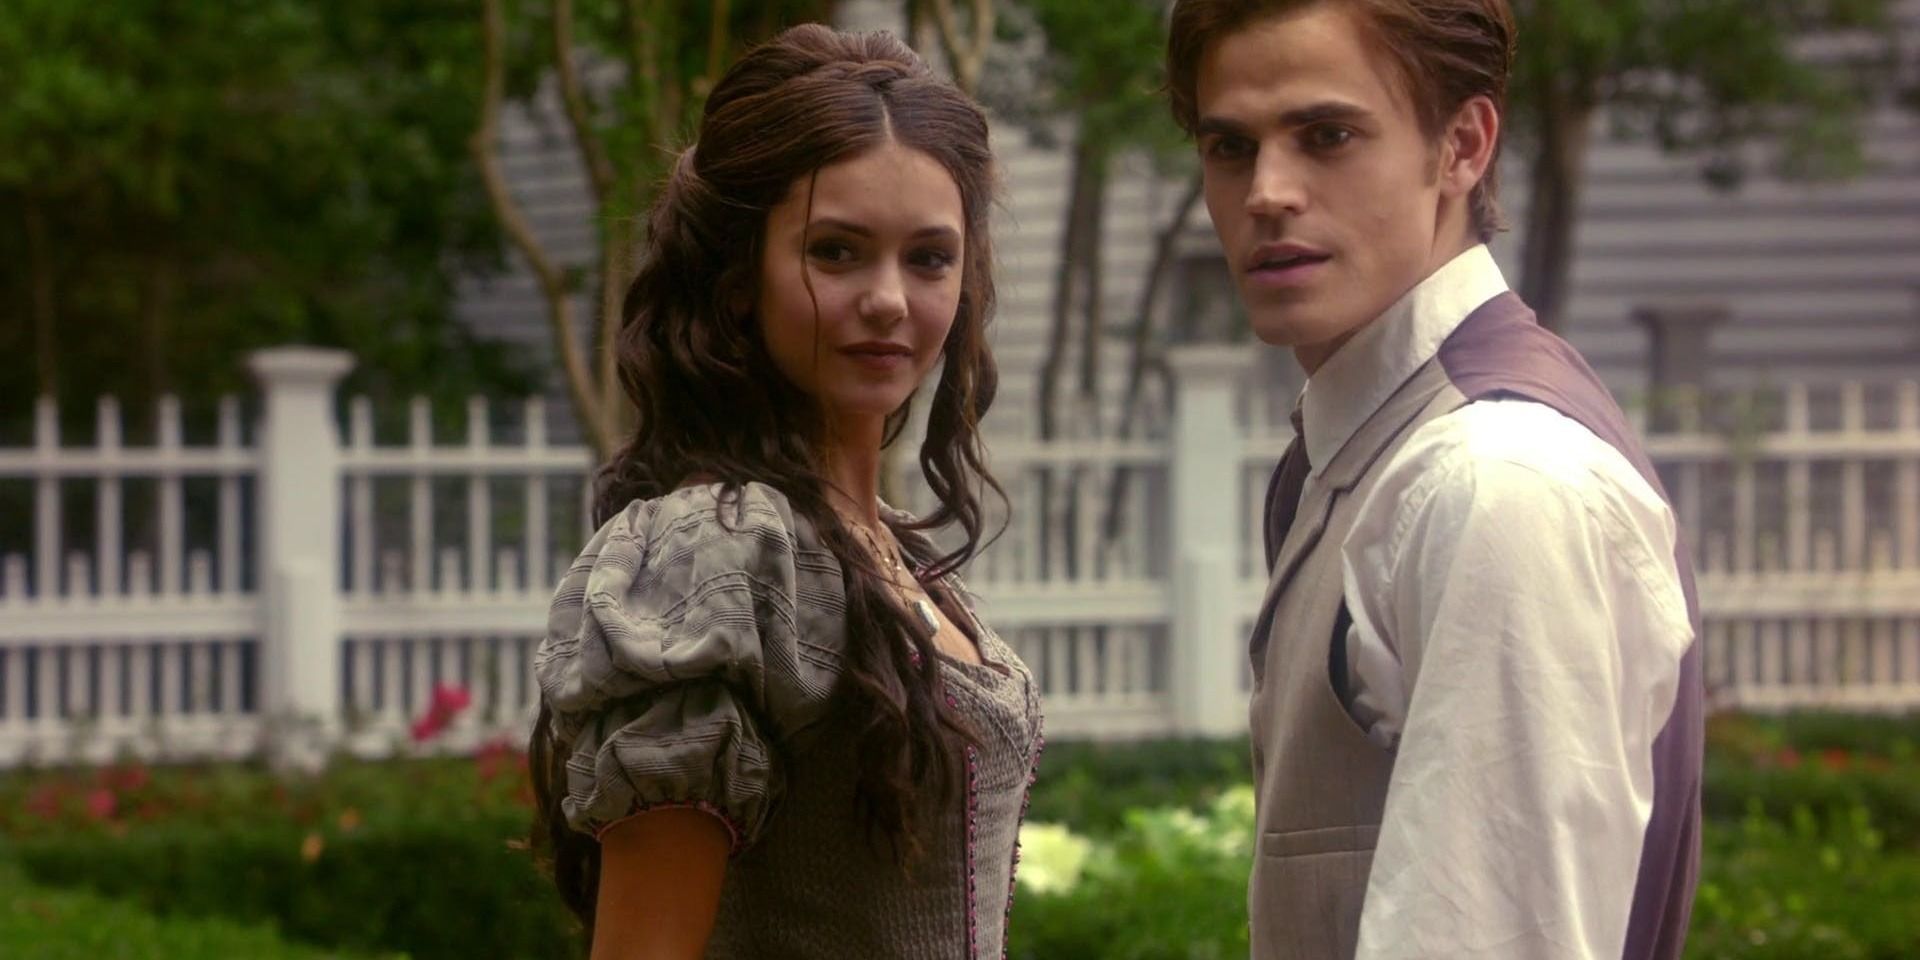 An image of Stefan and Katherine standing together in Mystic Falls in The Vampire Diaries